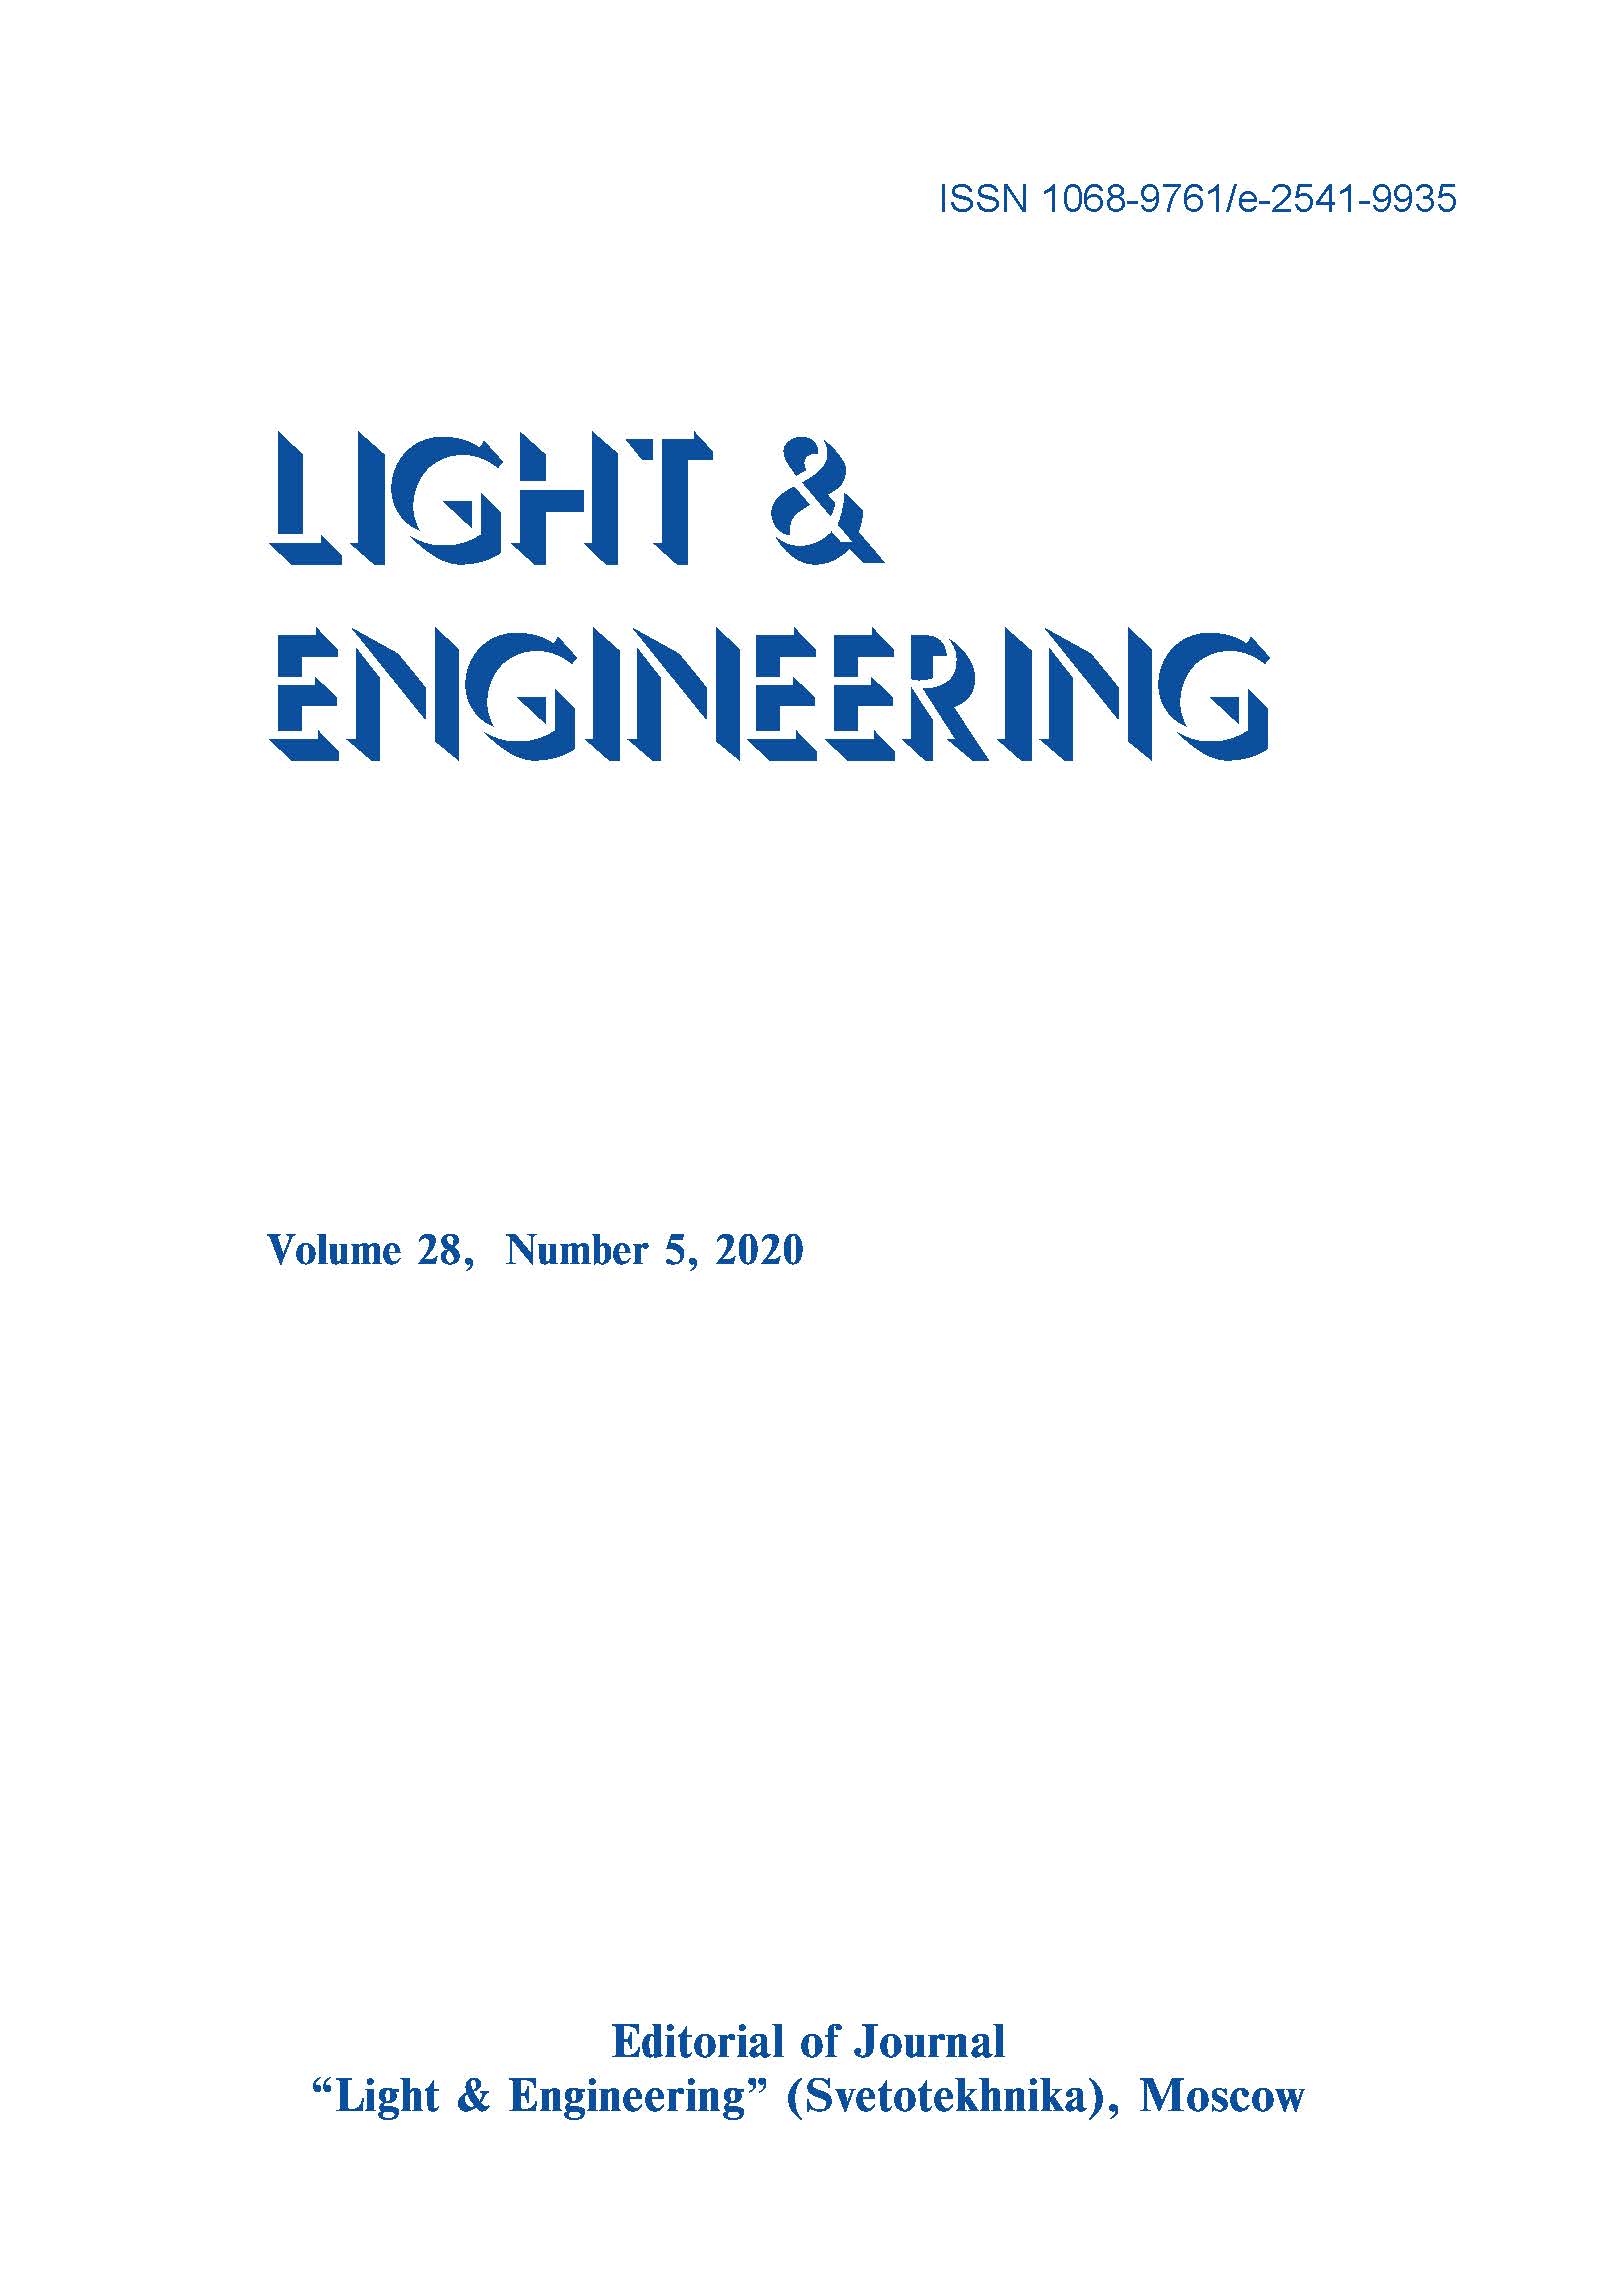 Methodology For Light Design Training In The Sphere Of Architectural Environment Design Light & Engineering Vol. 28, No. 5